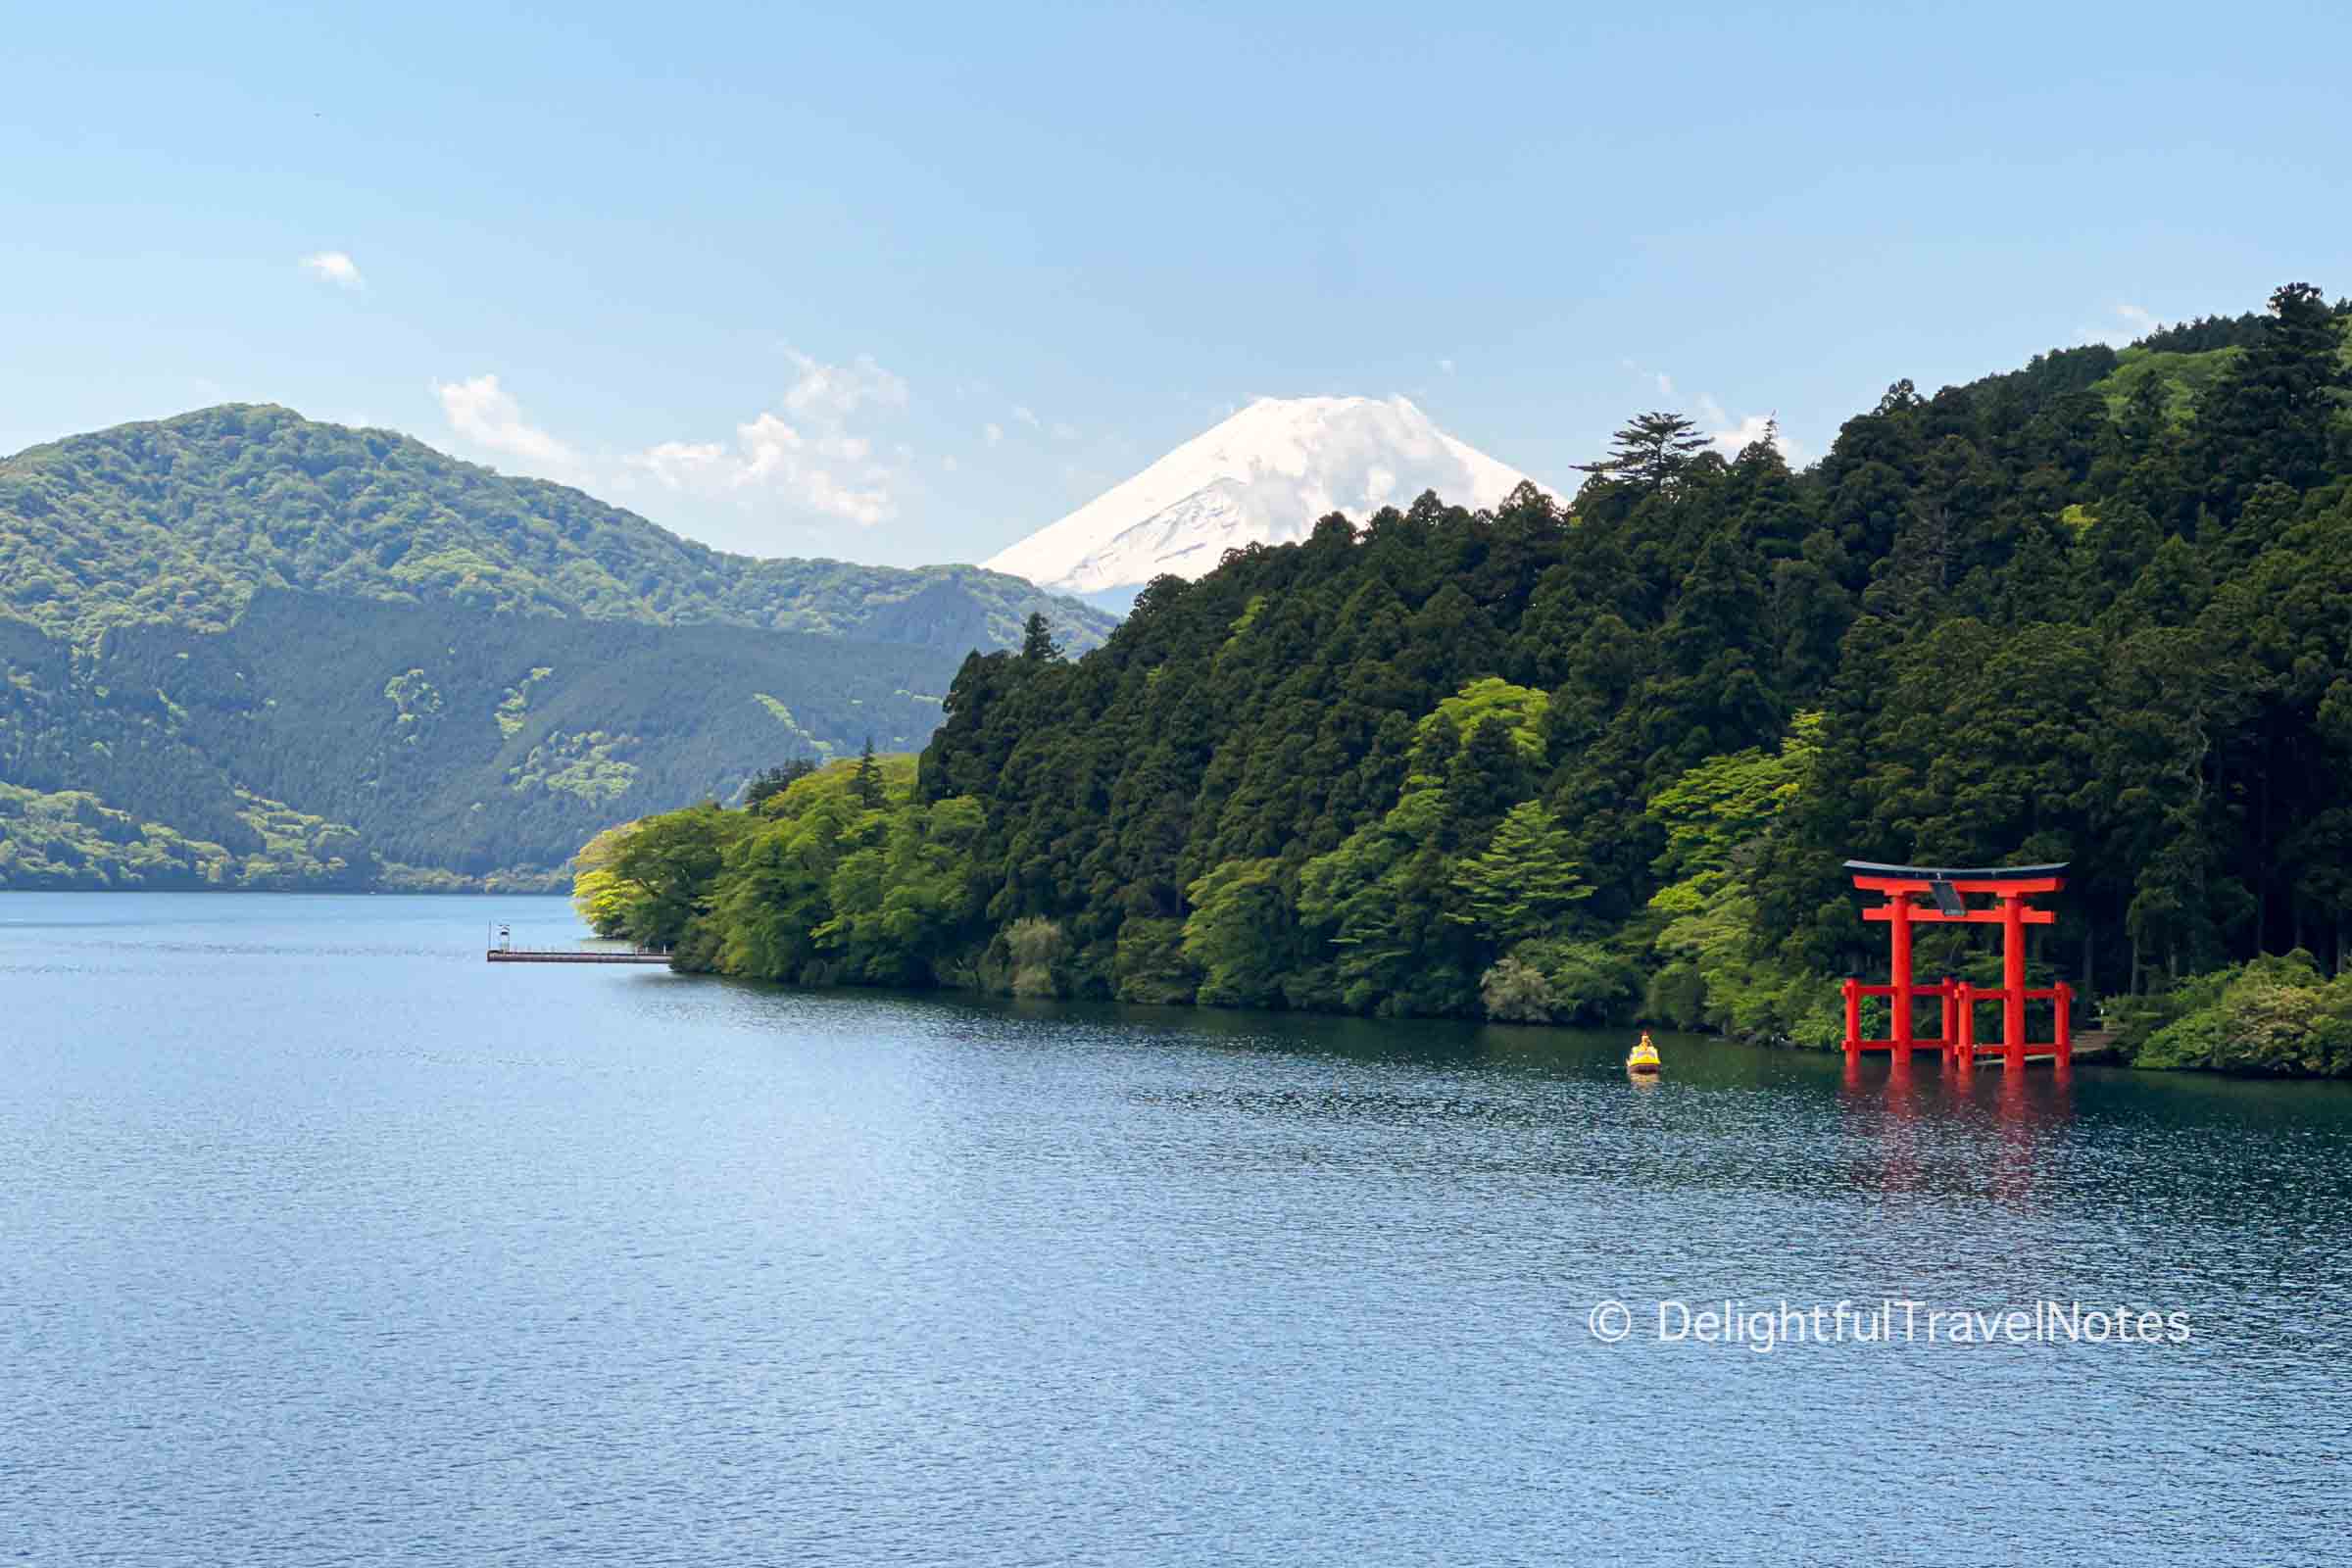 View of Lake Ashi and Mount Fuji from the Pirate Ship.